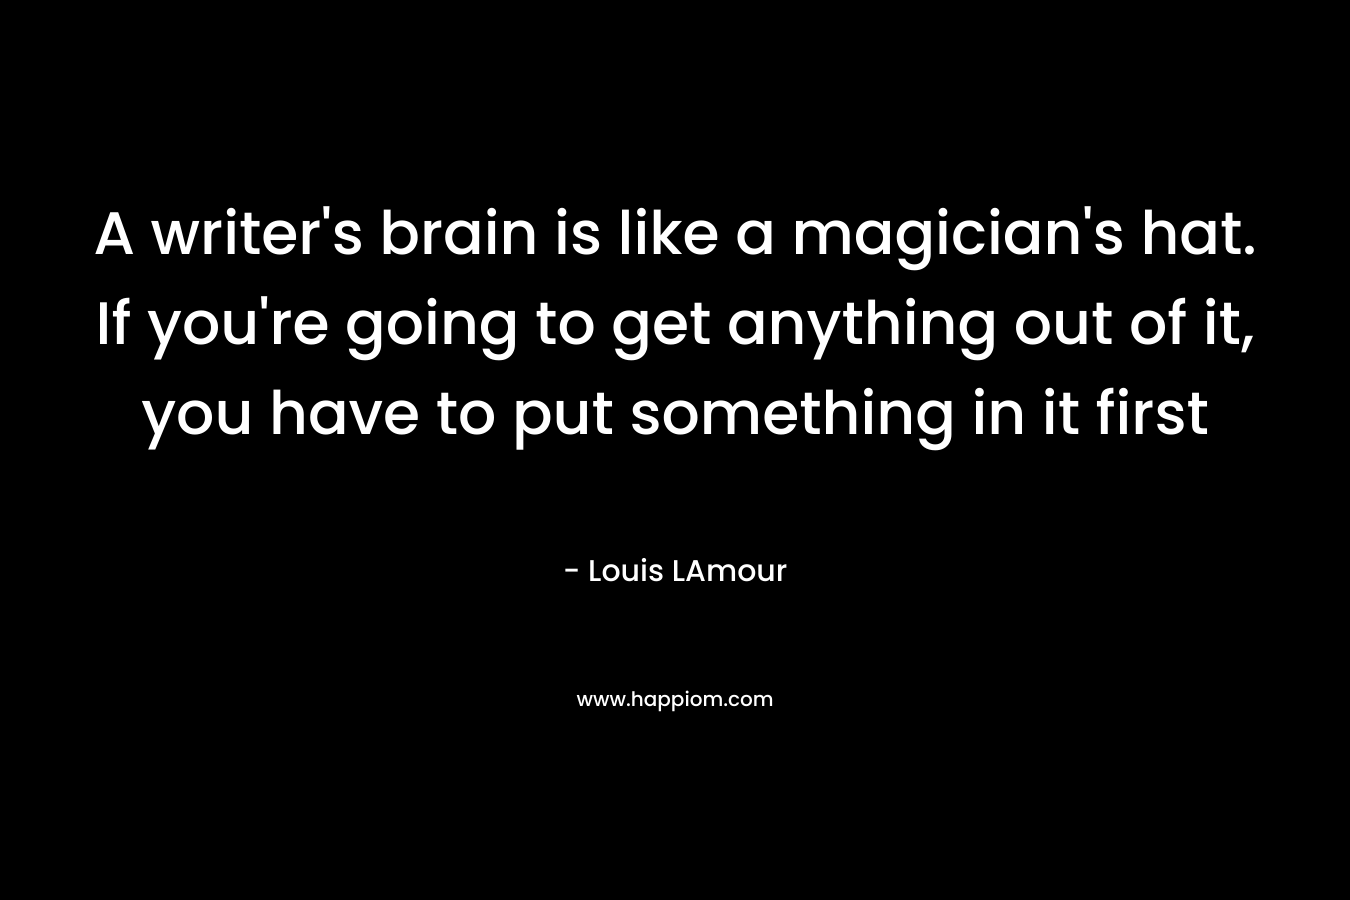 A writer’s brain is like a magician’s hat. If you’re going to get anything out of it, you have to put something in it first – Louis LAmour